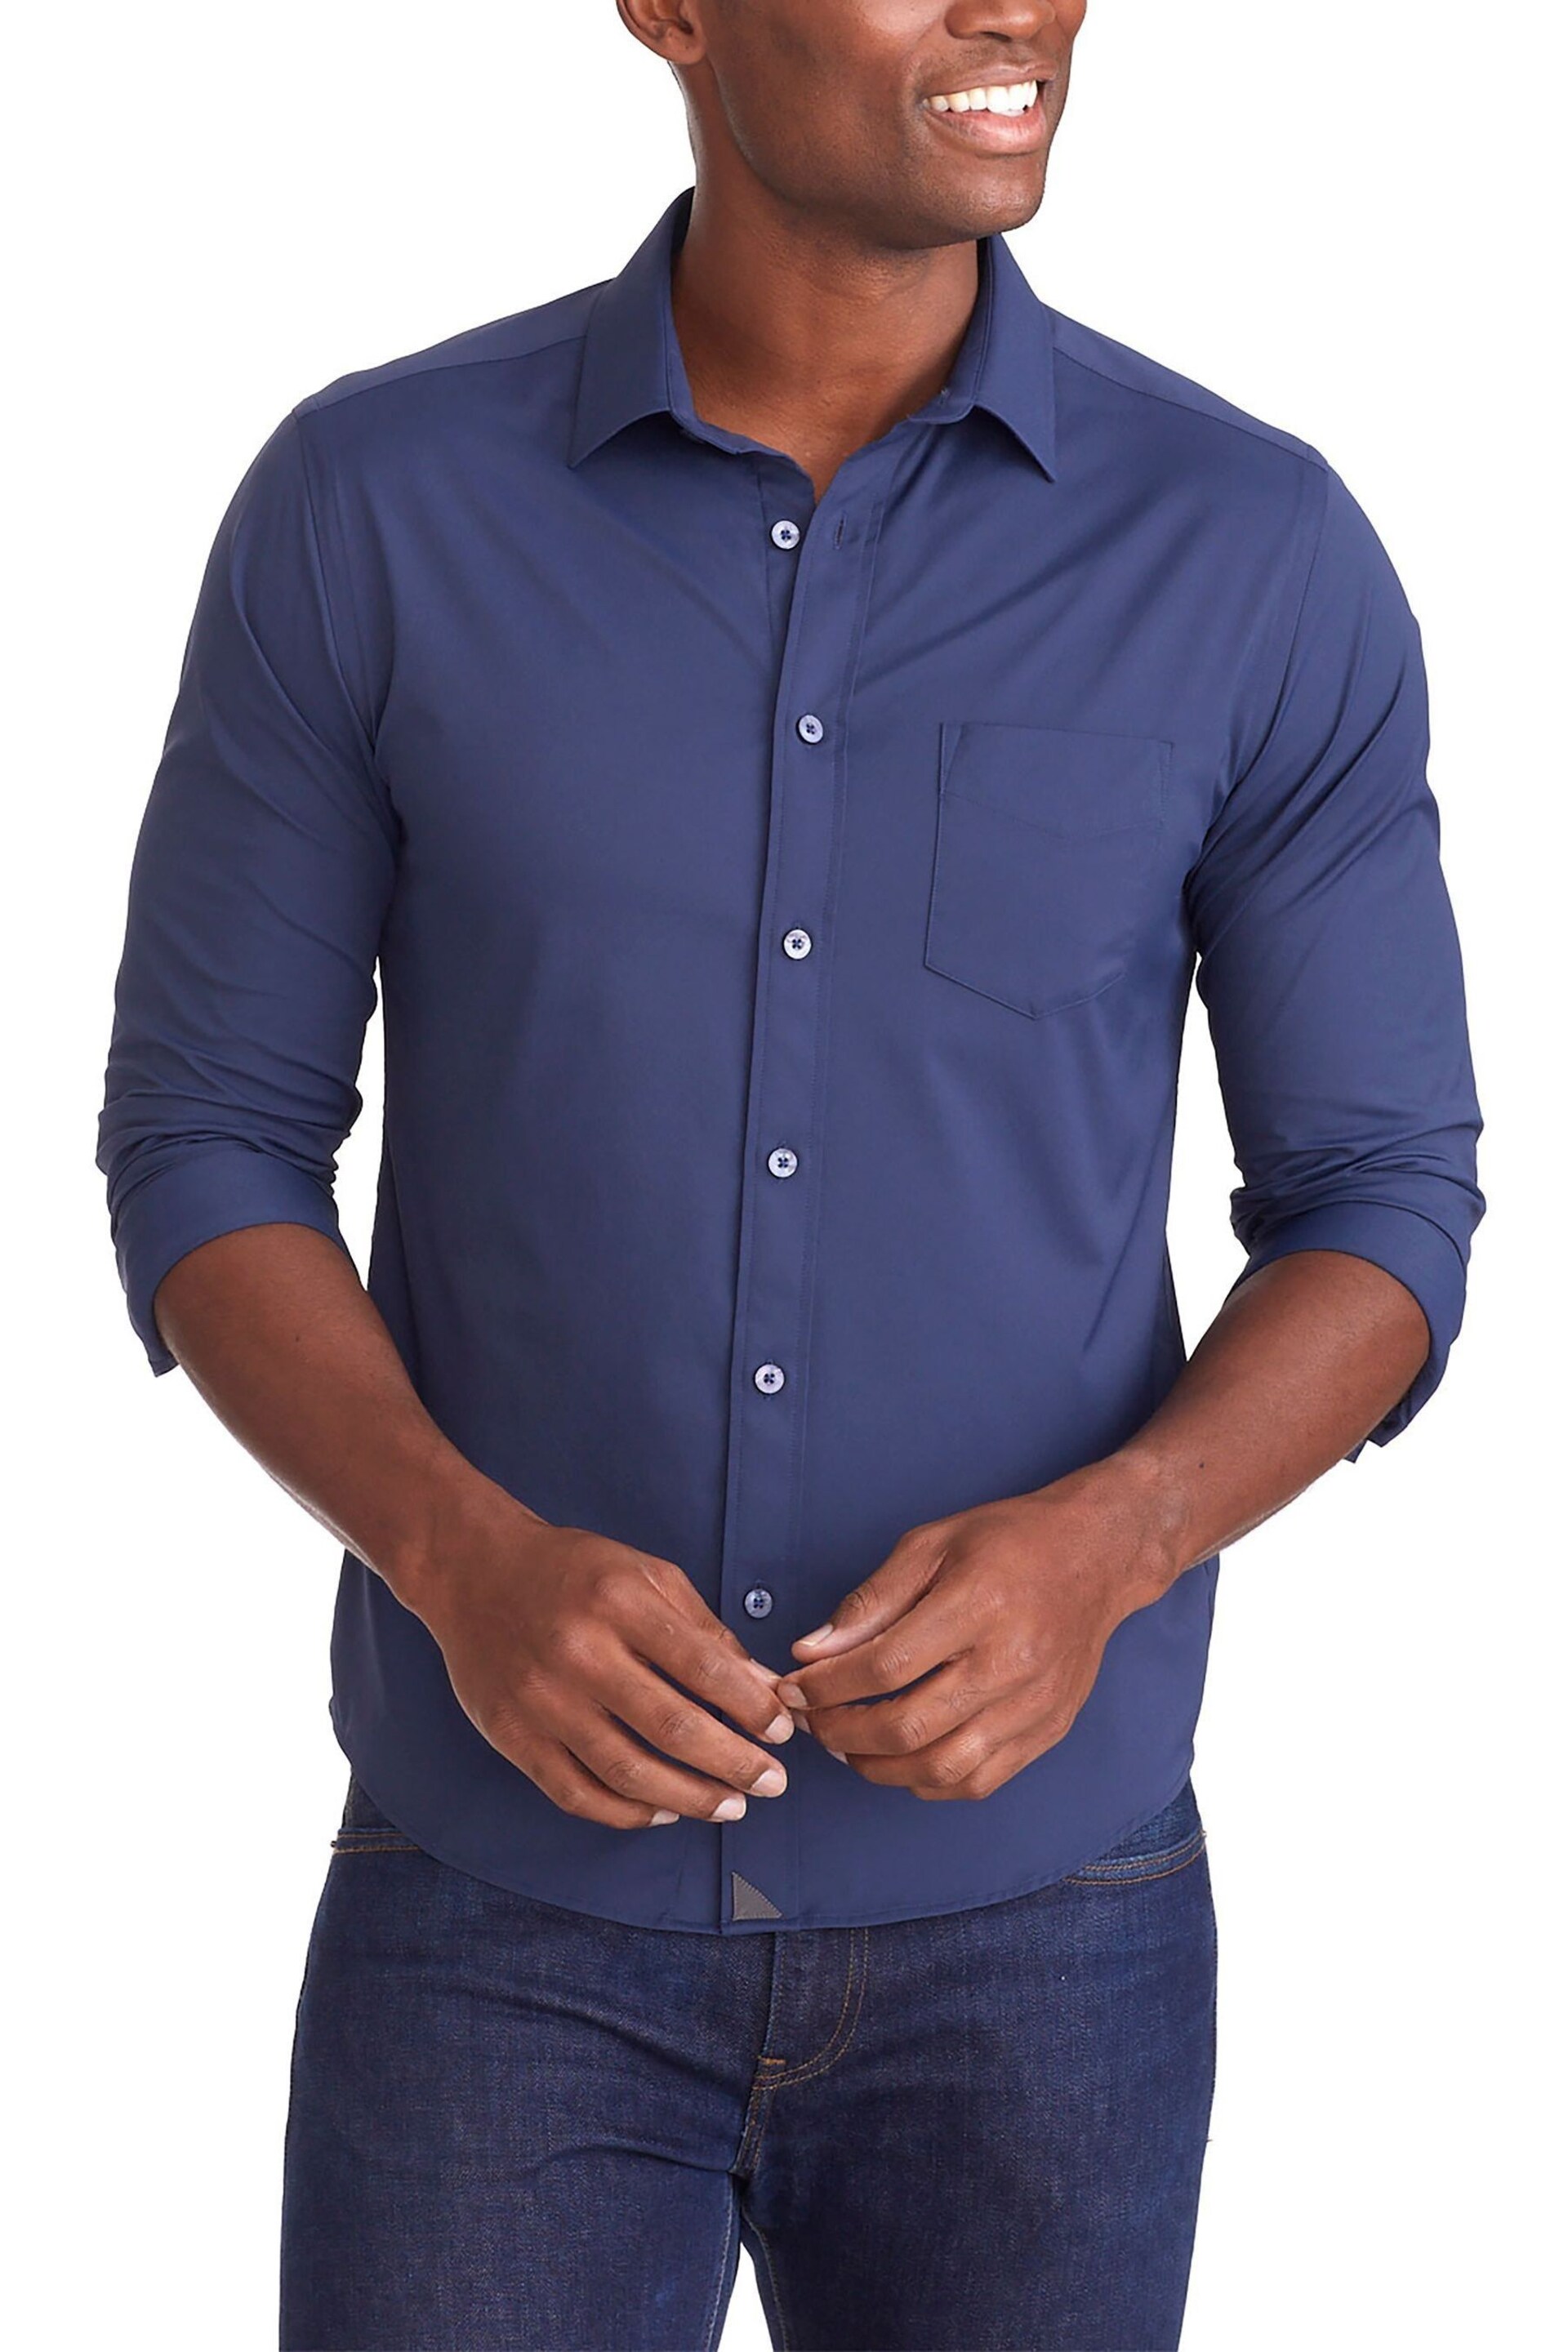 UNTUCKit Blue Wrinkle-Free Performance Relaxed Fit Gironde Shirt - Image 1 of 3